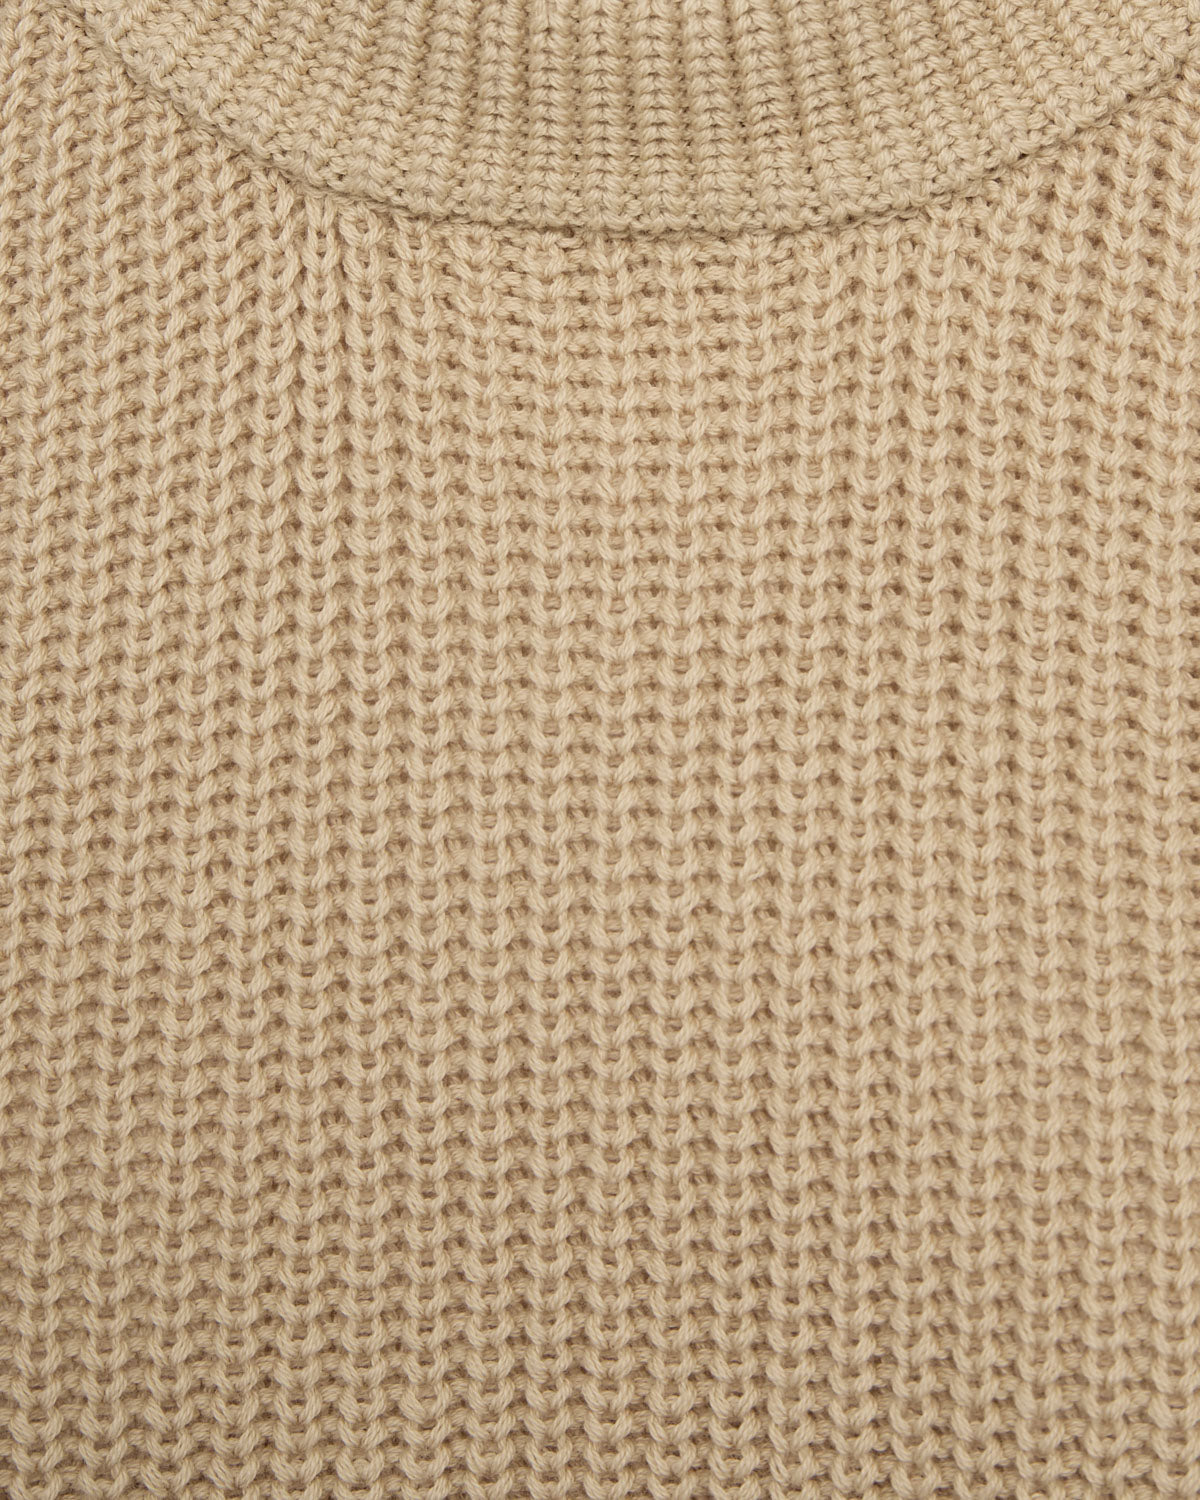 Mikala Pullover - brown rice